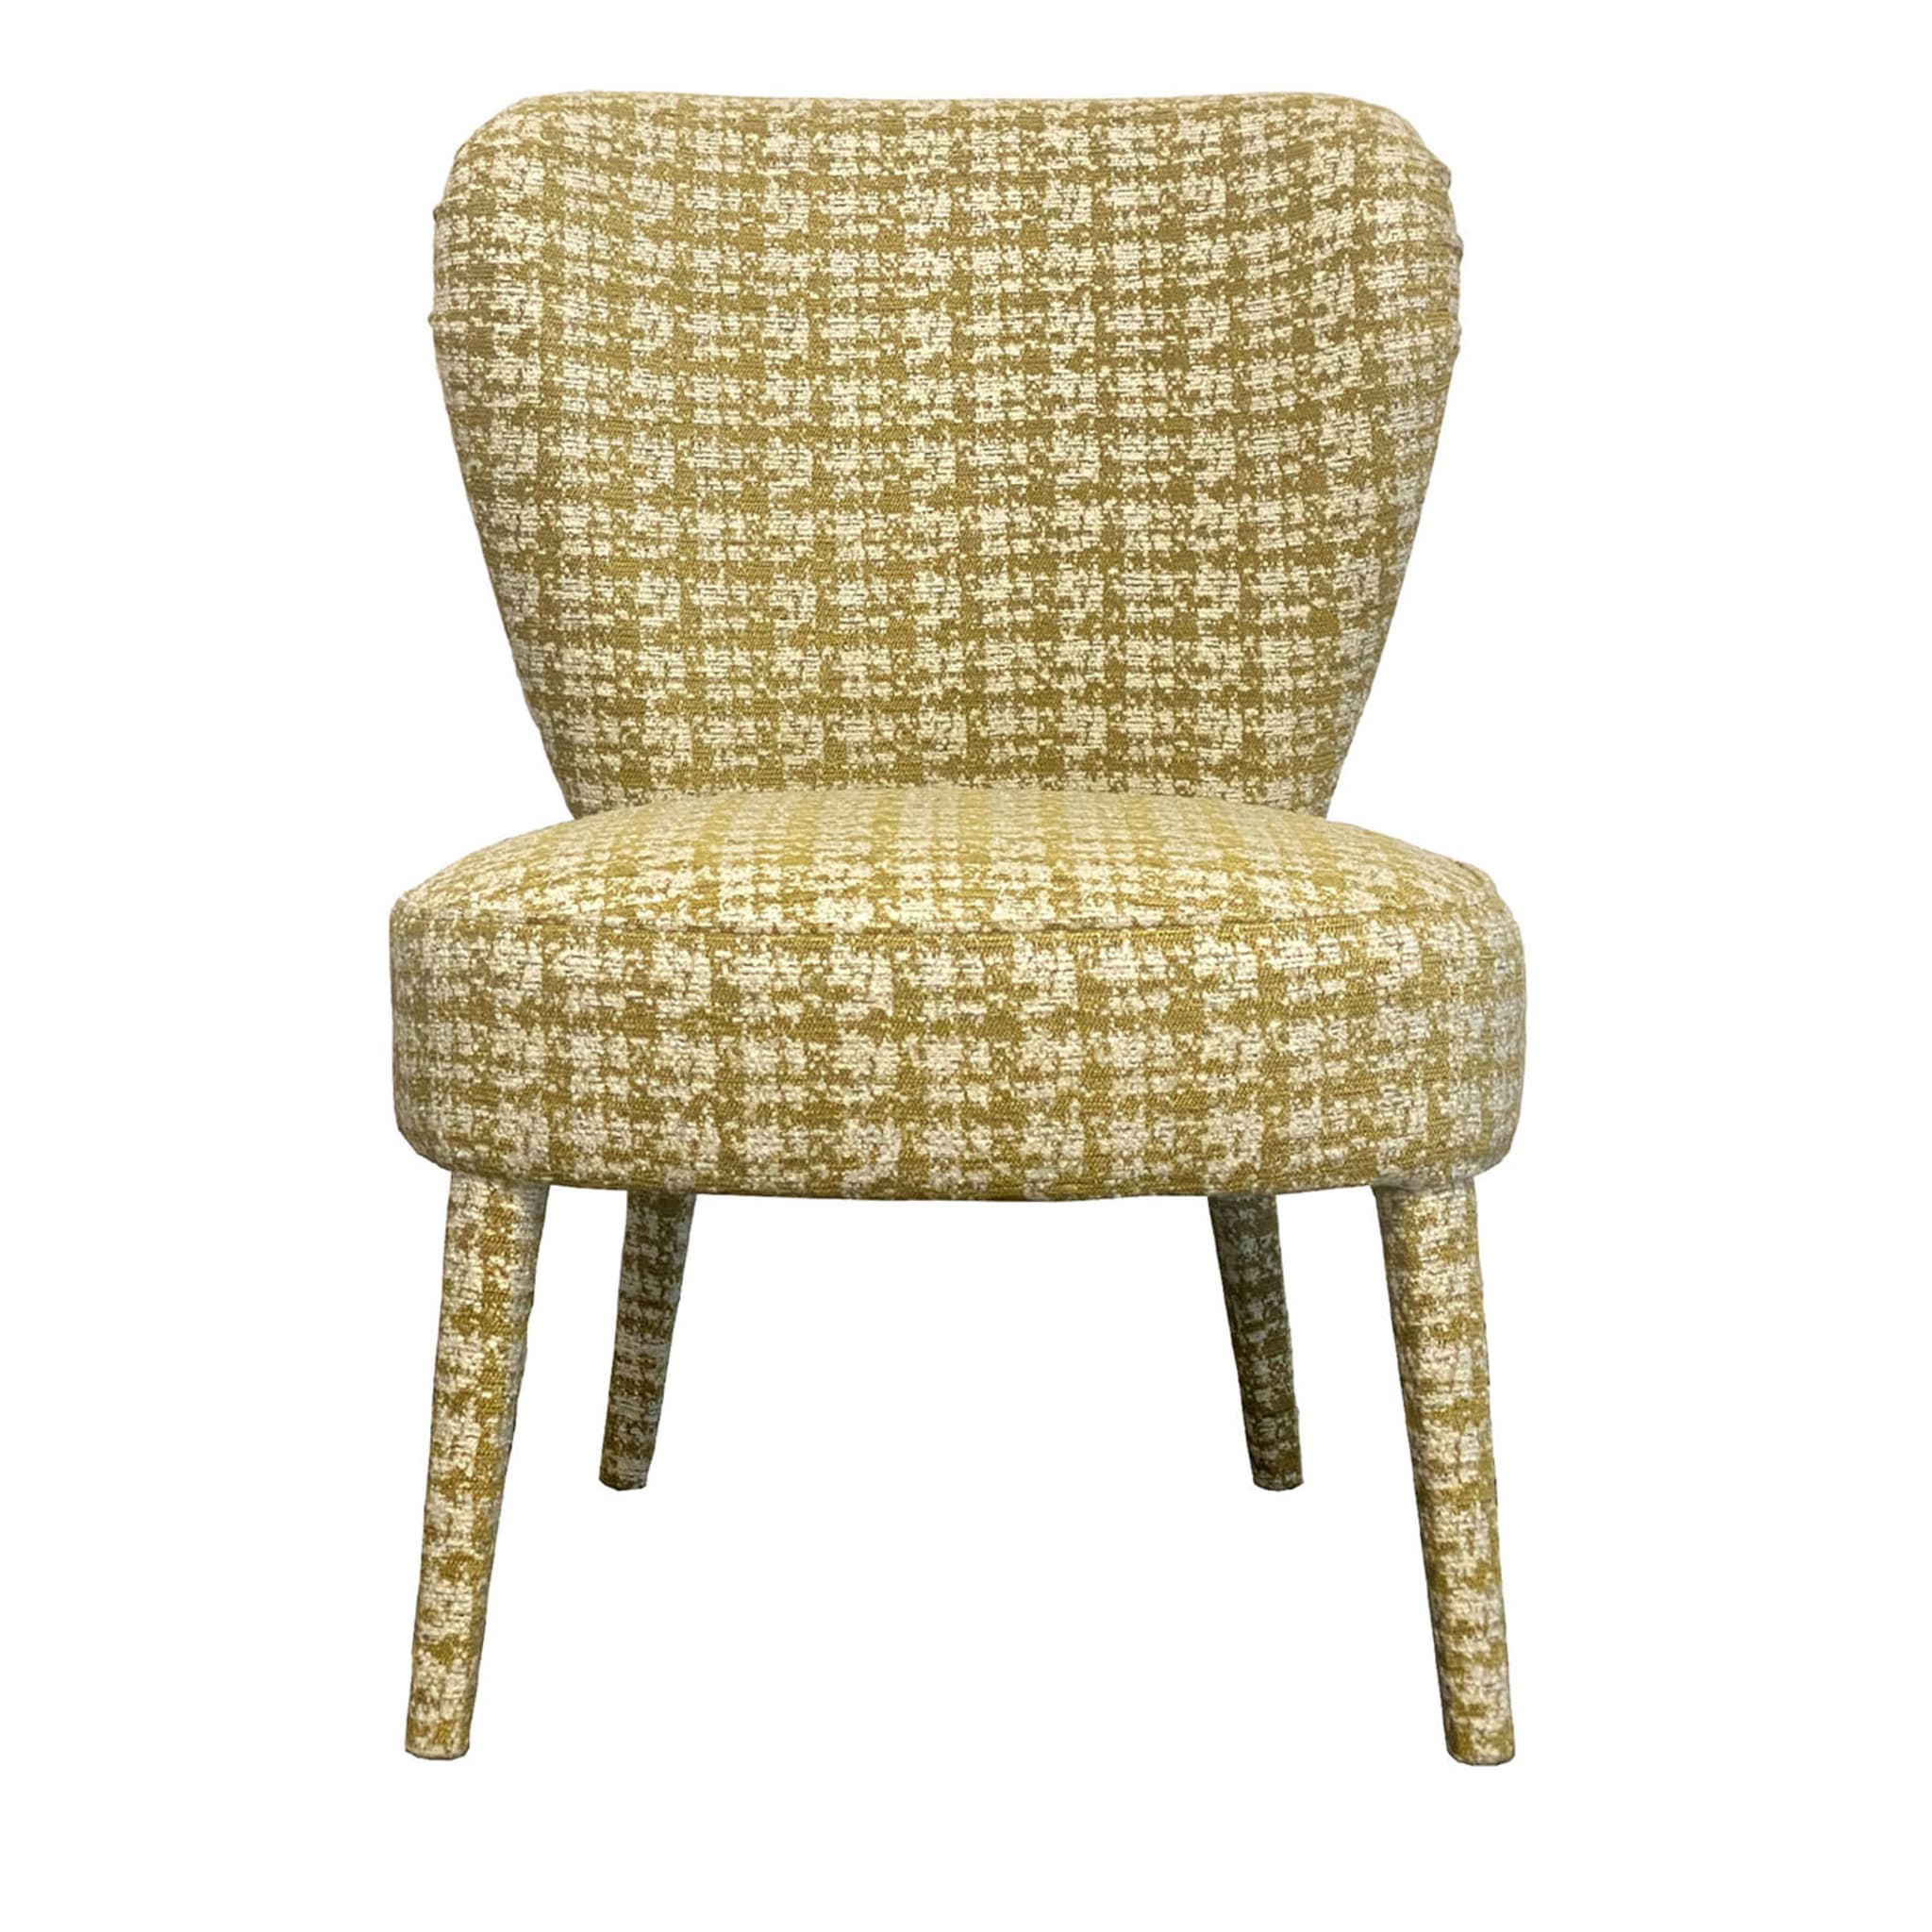 Cloe' Pattern Upholstered Lounge Chair - Main view